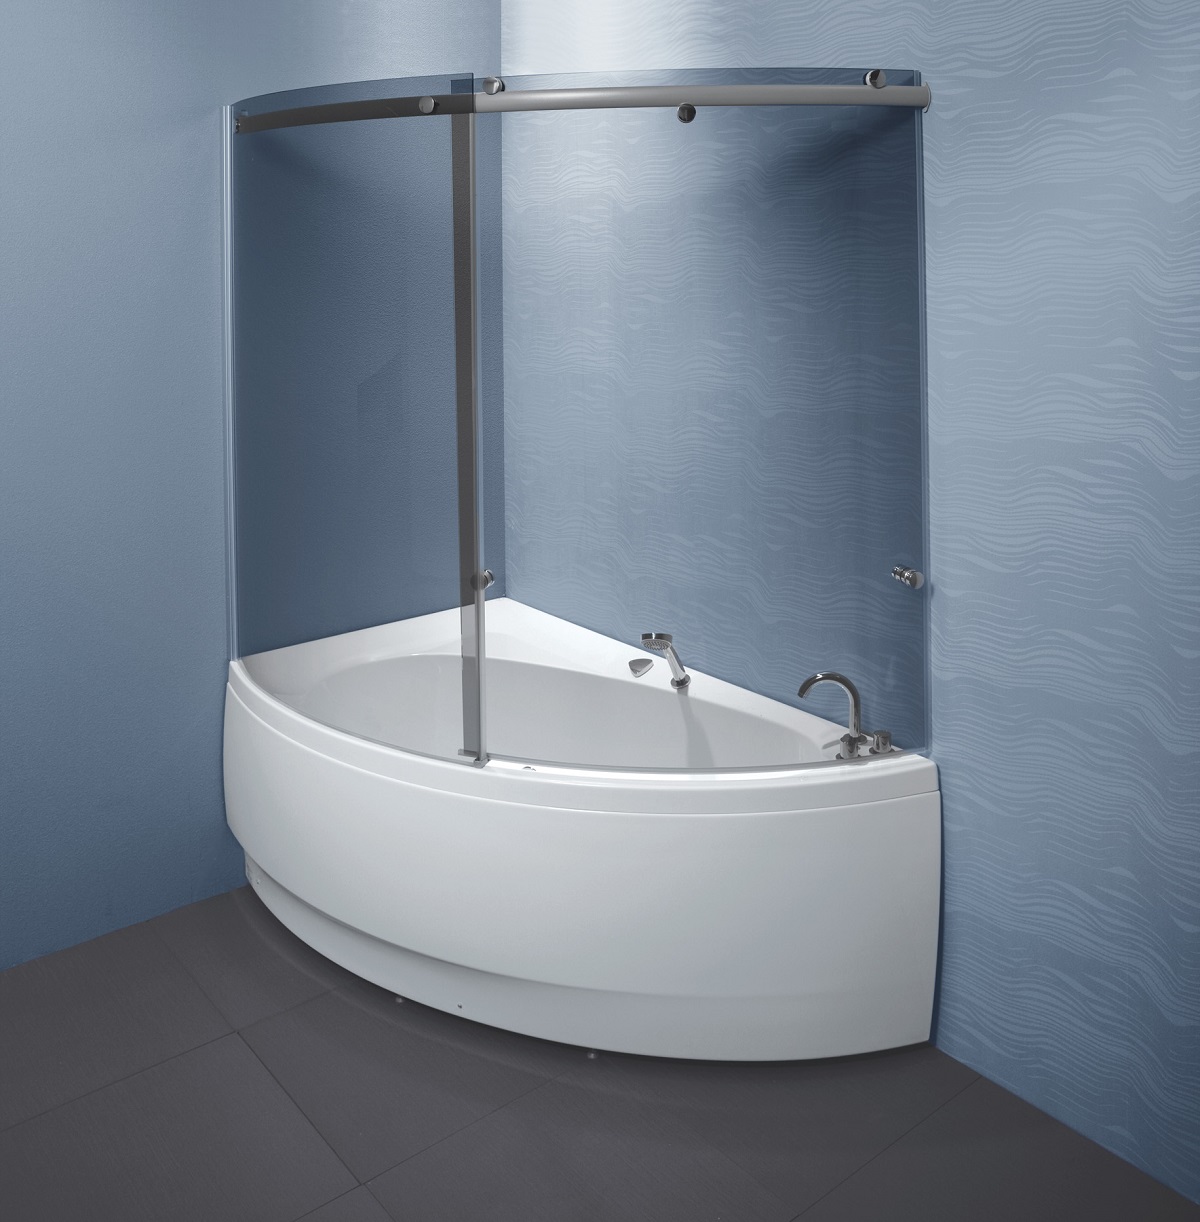 Idea R Tinted Curved Glass Shower Wall 9276 web